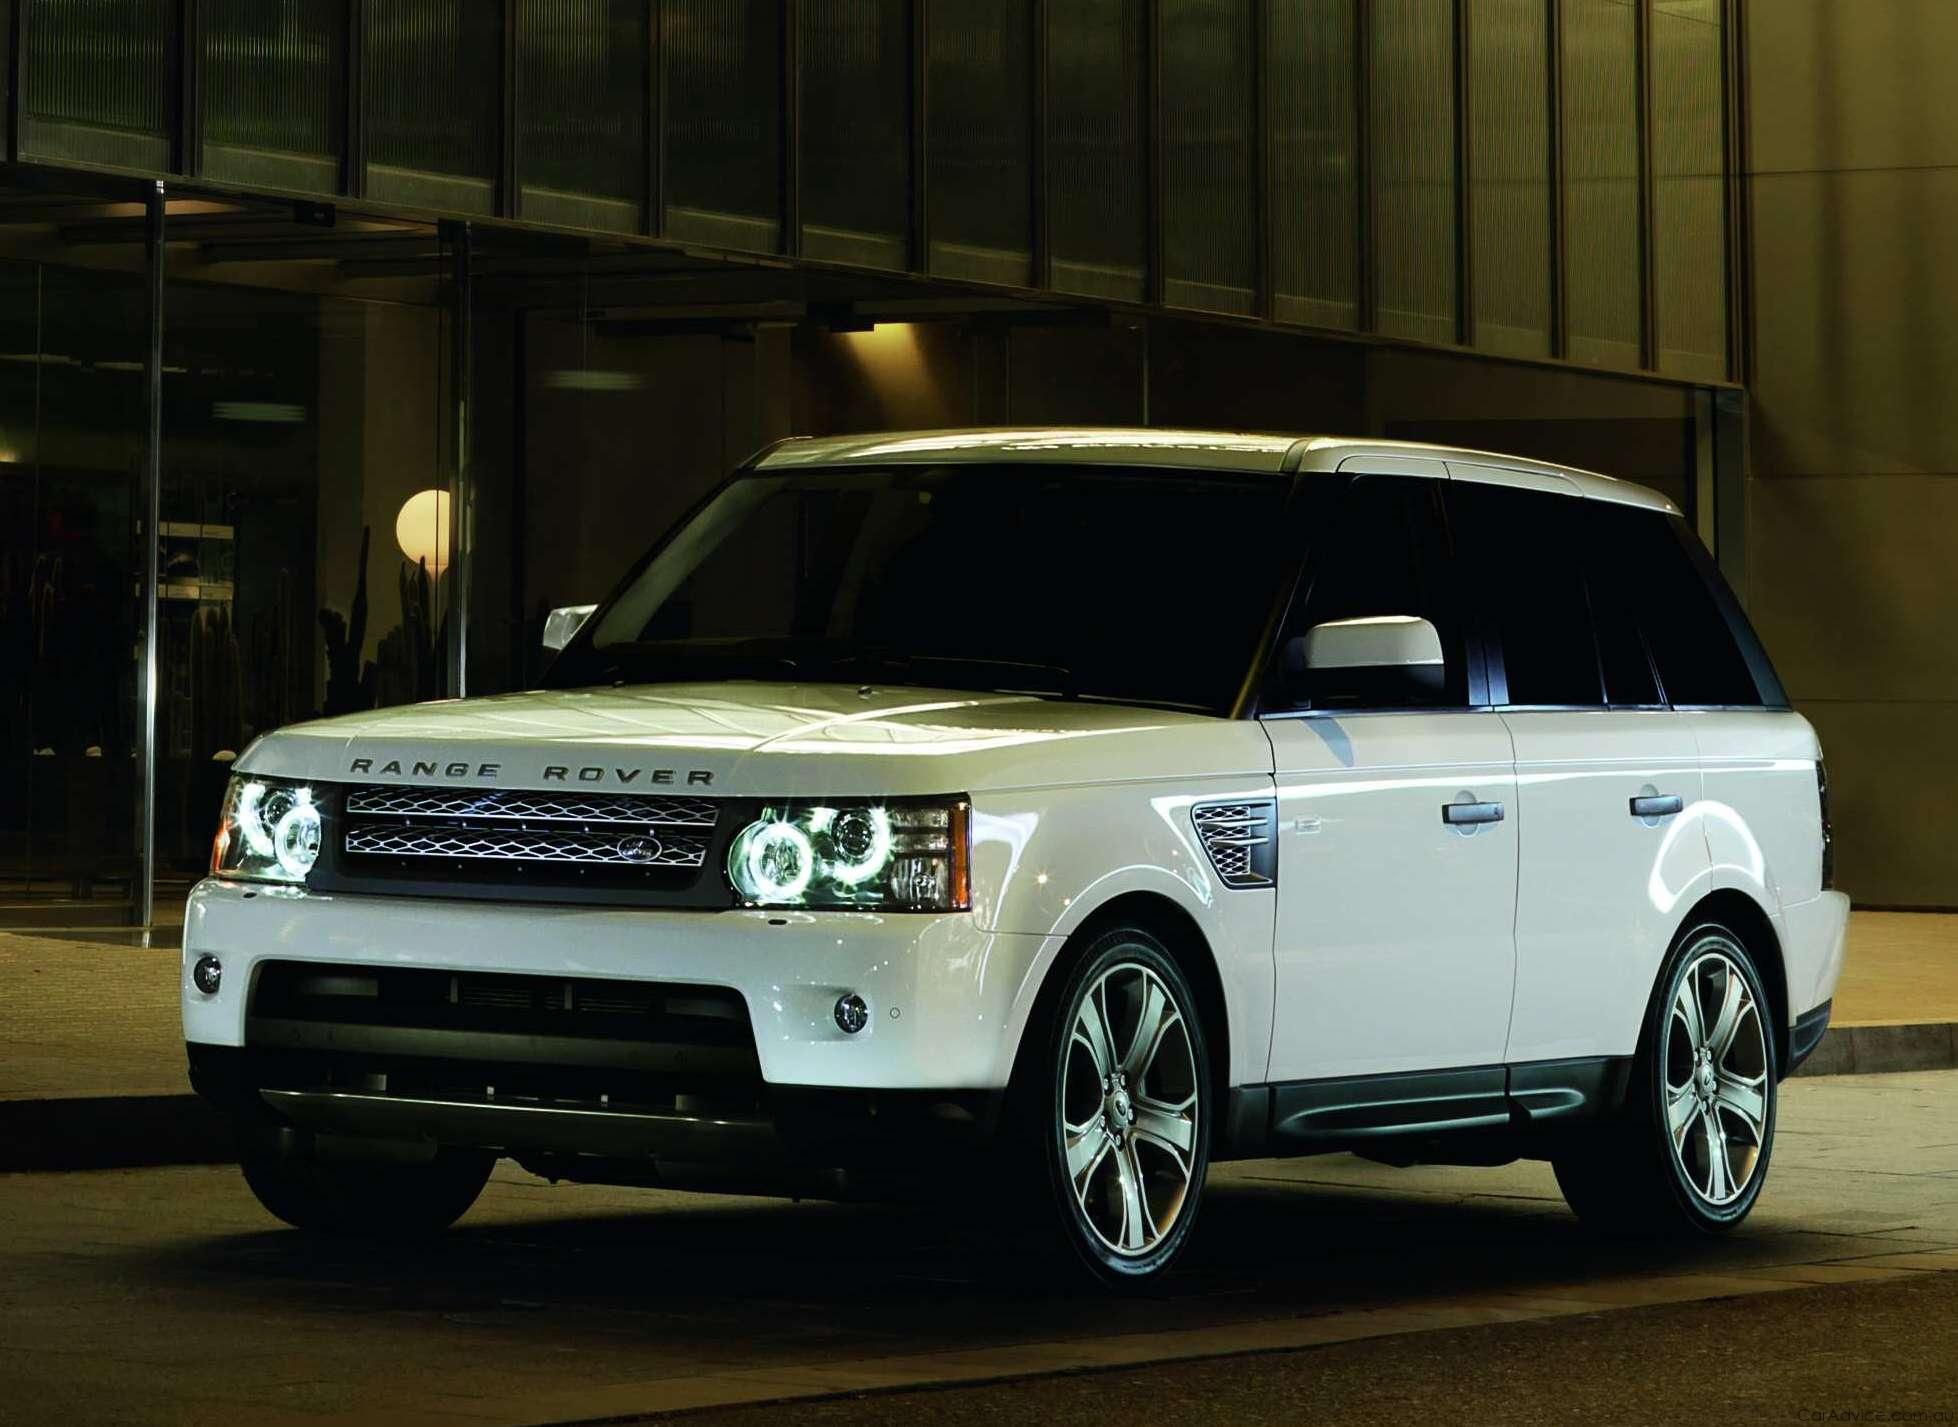 Quality Land Rover Range Rover Sport Wallpaper, Cars